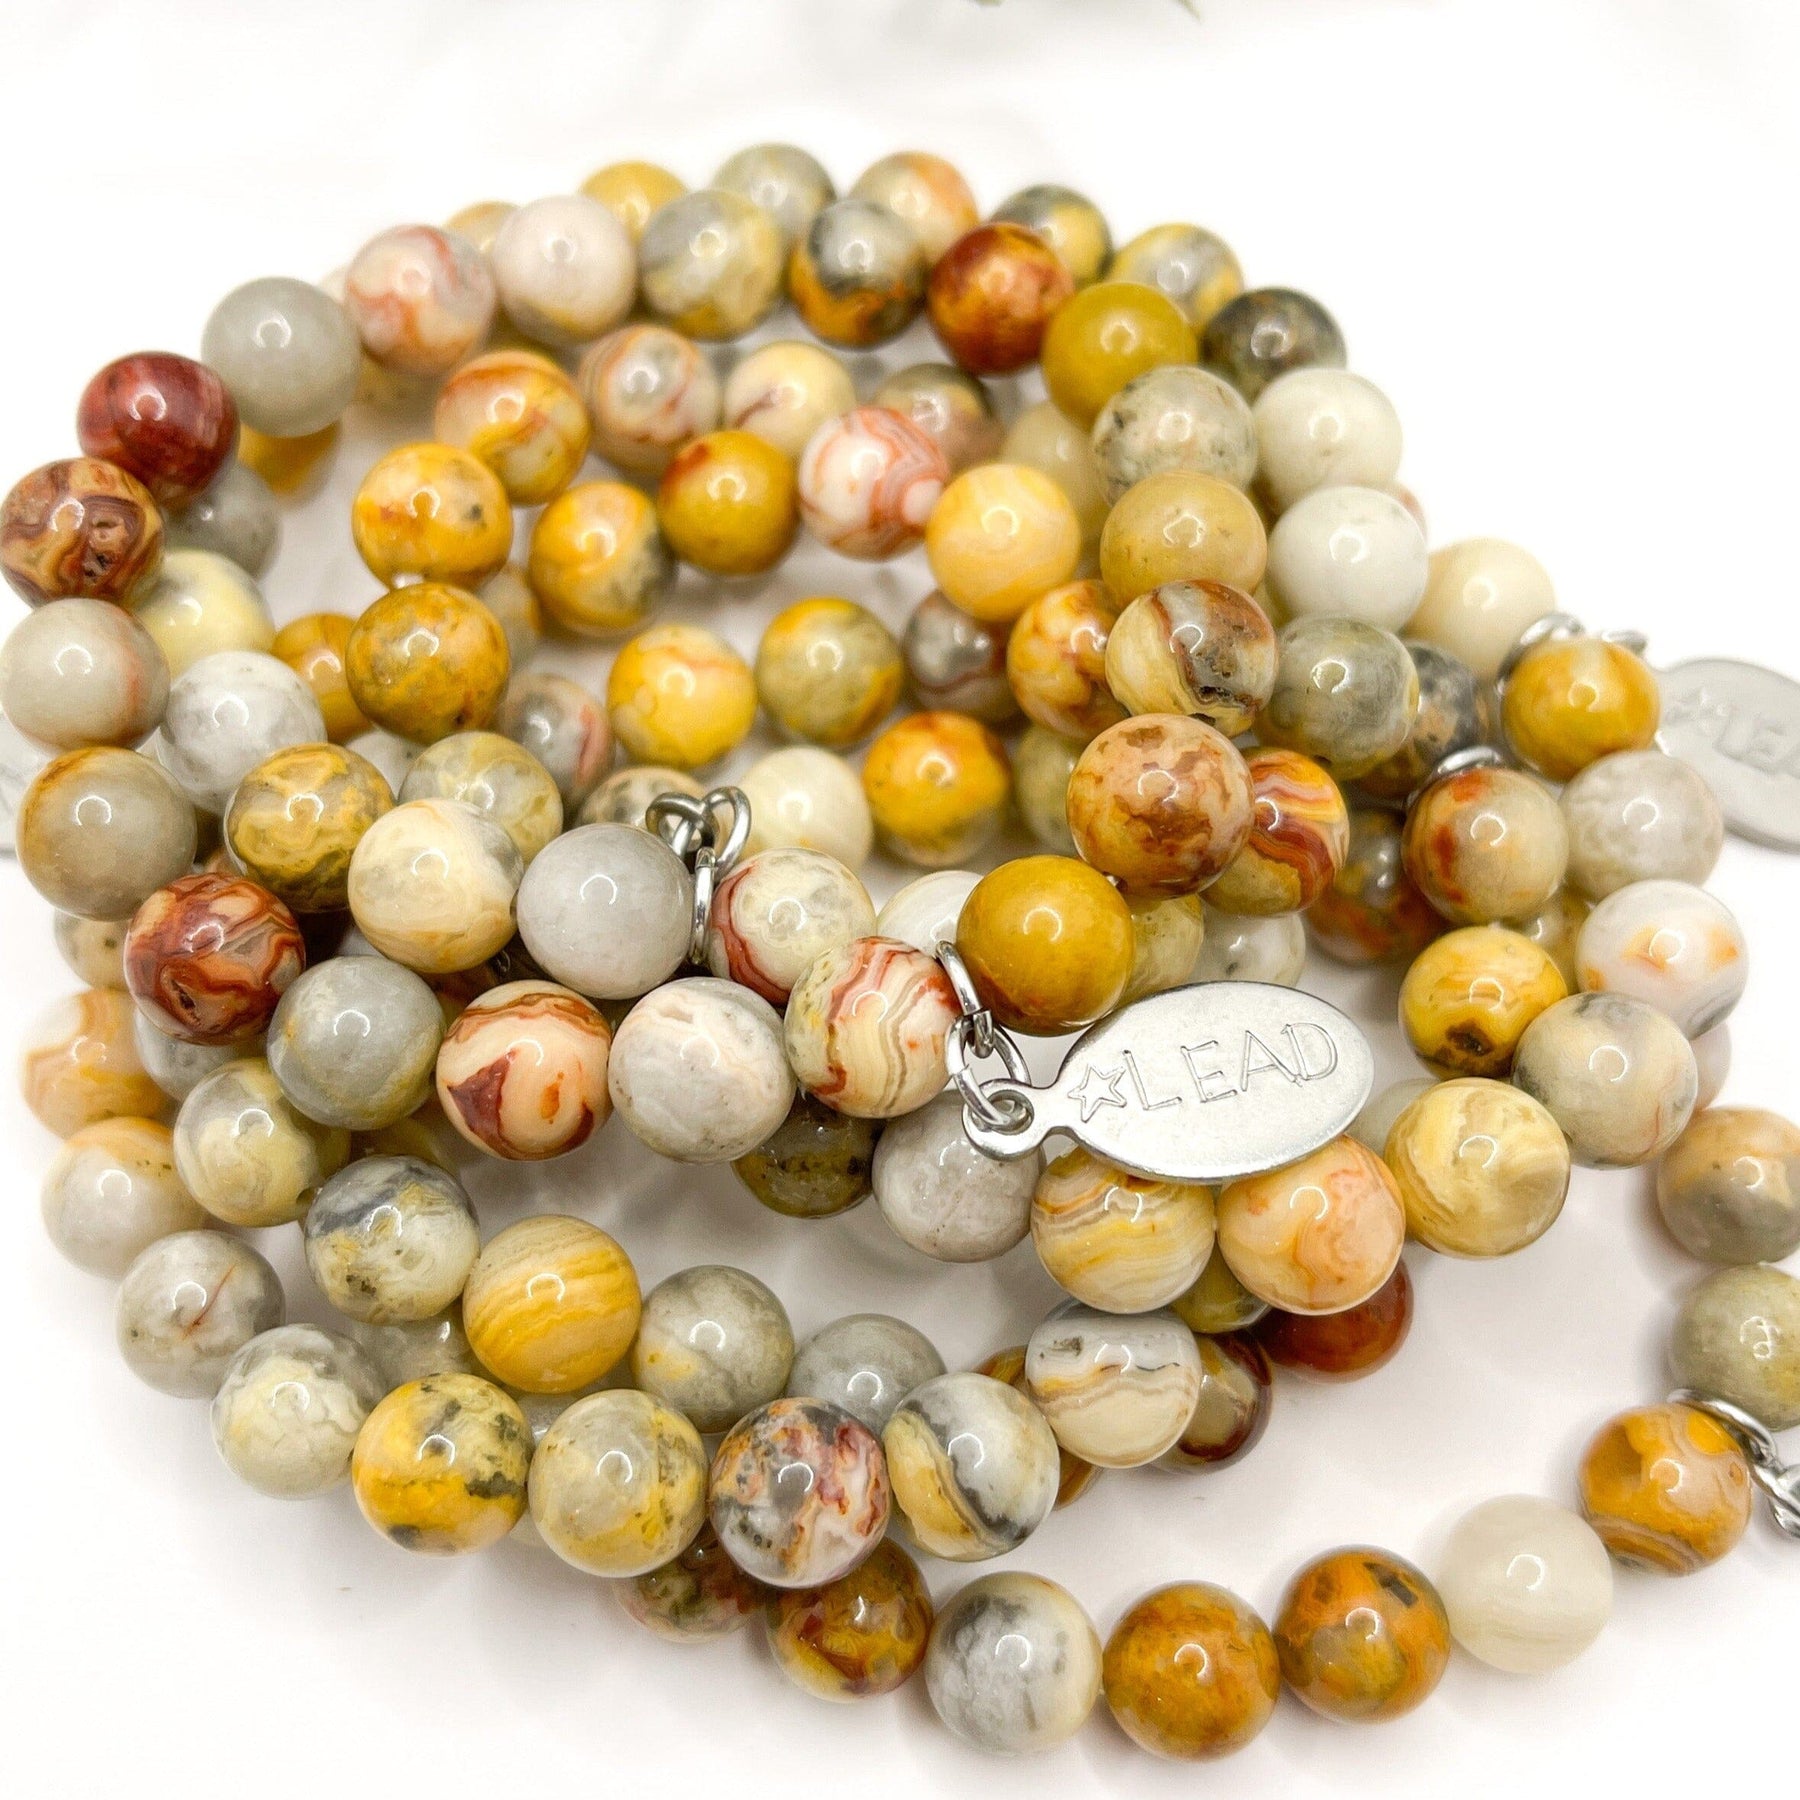 Crazy Lace Agate 8mm beads.